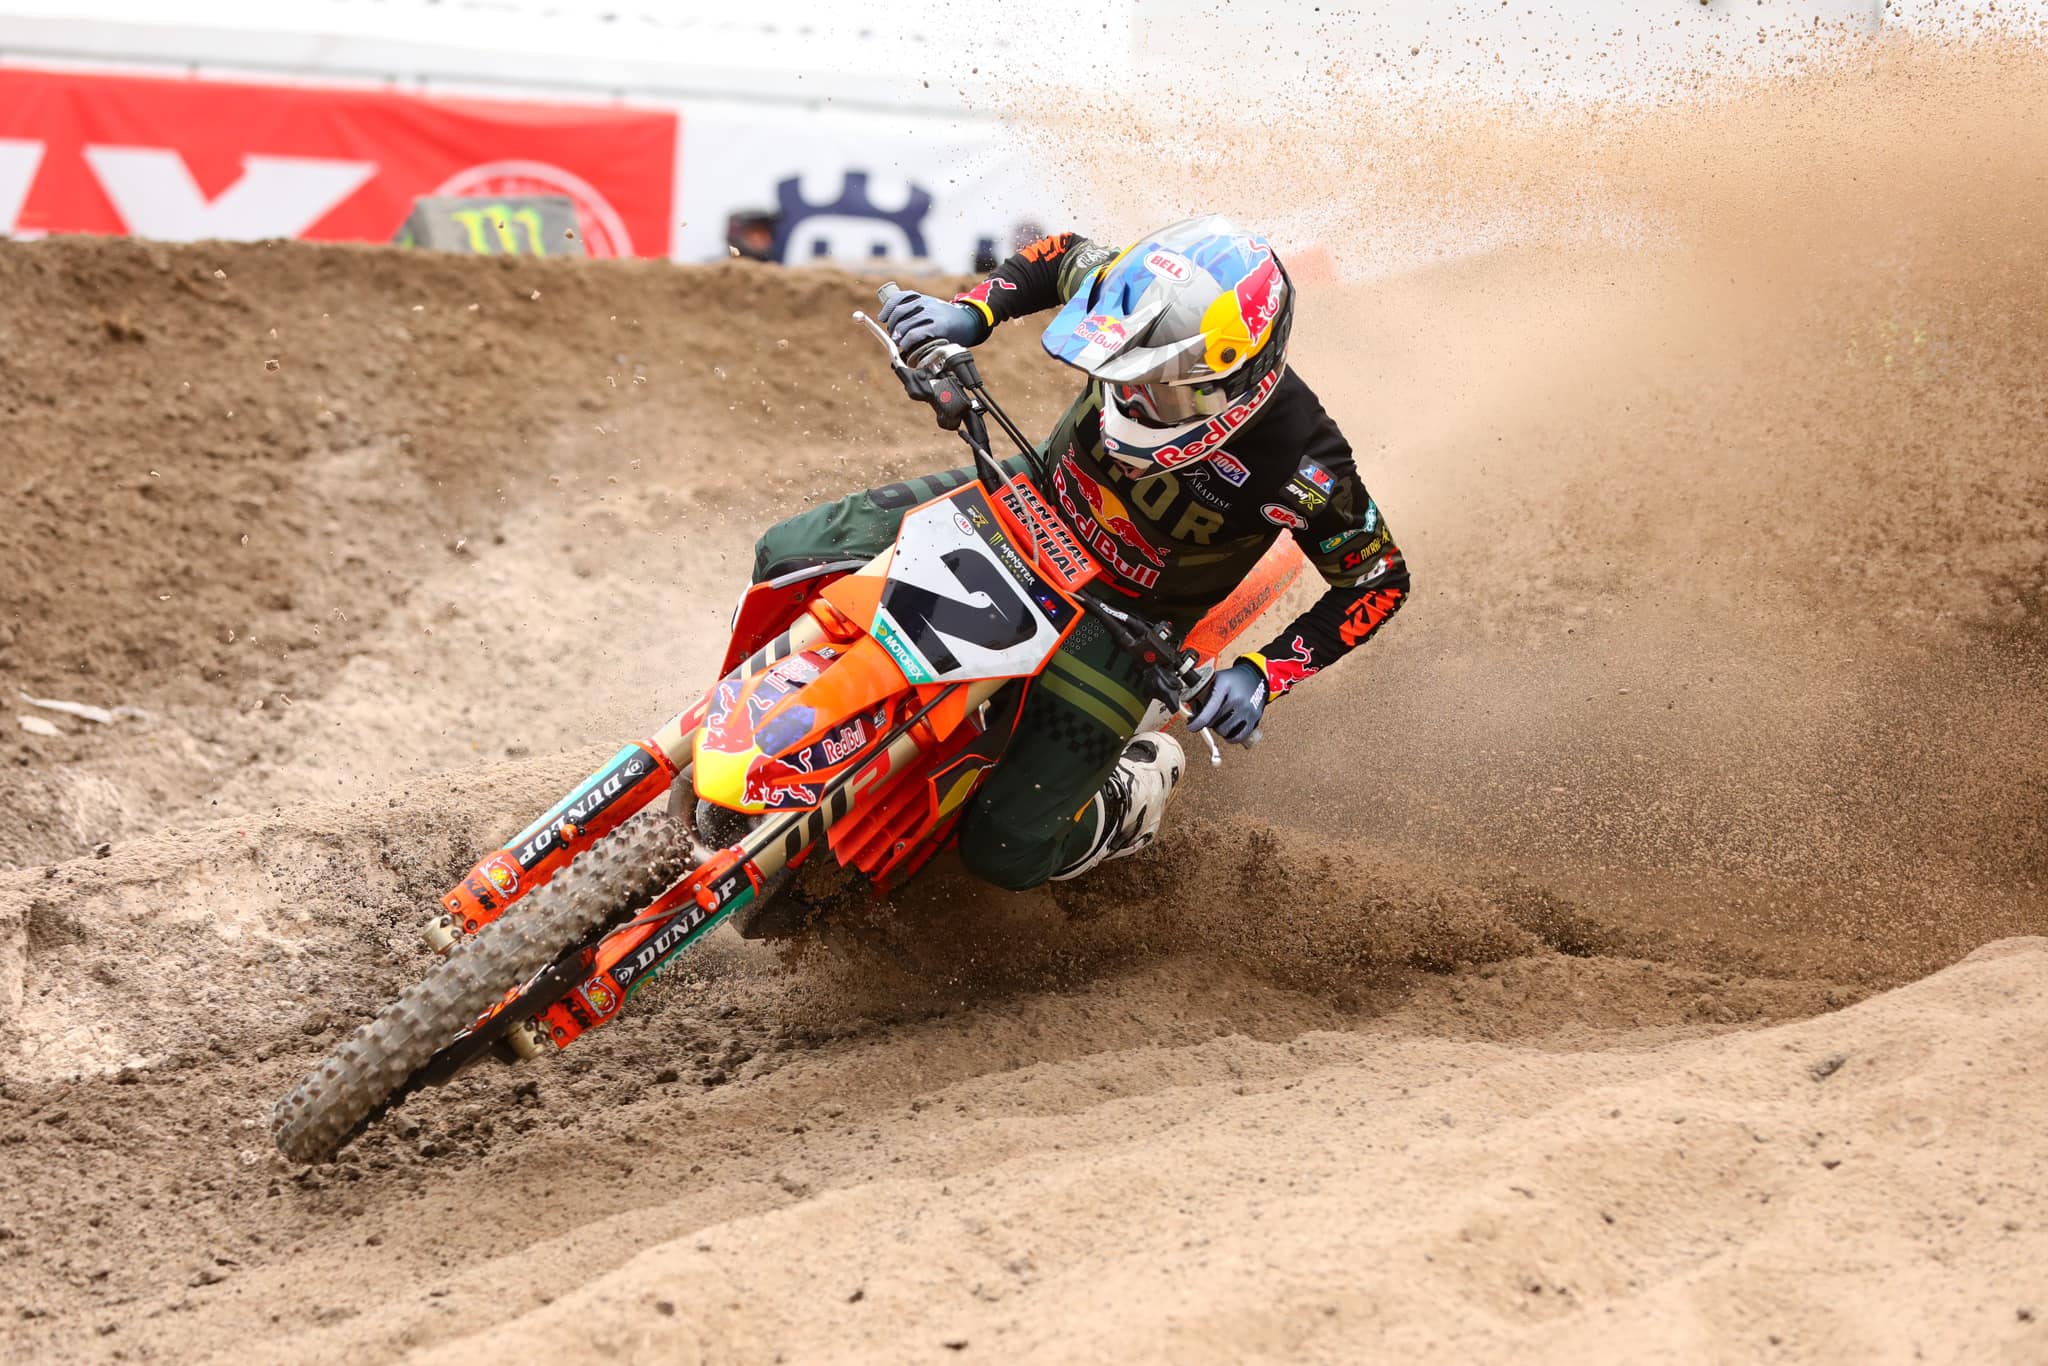 RESULTS FROM AMA SUPERCROSS IN TAMPA